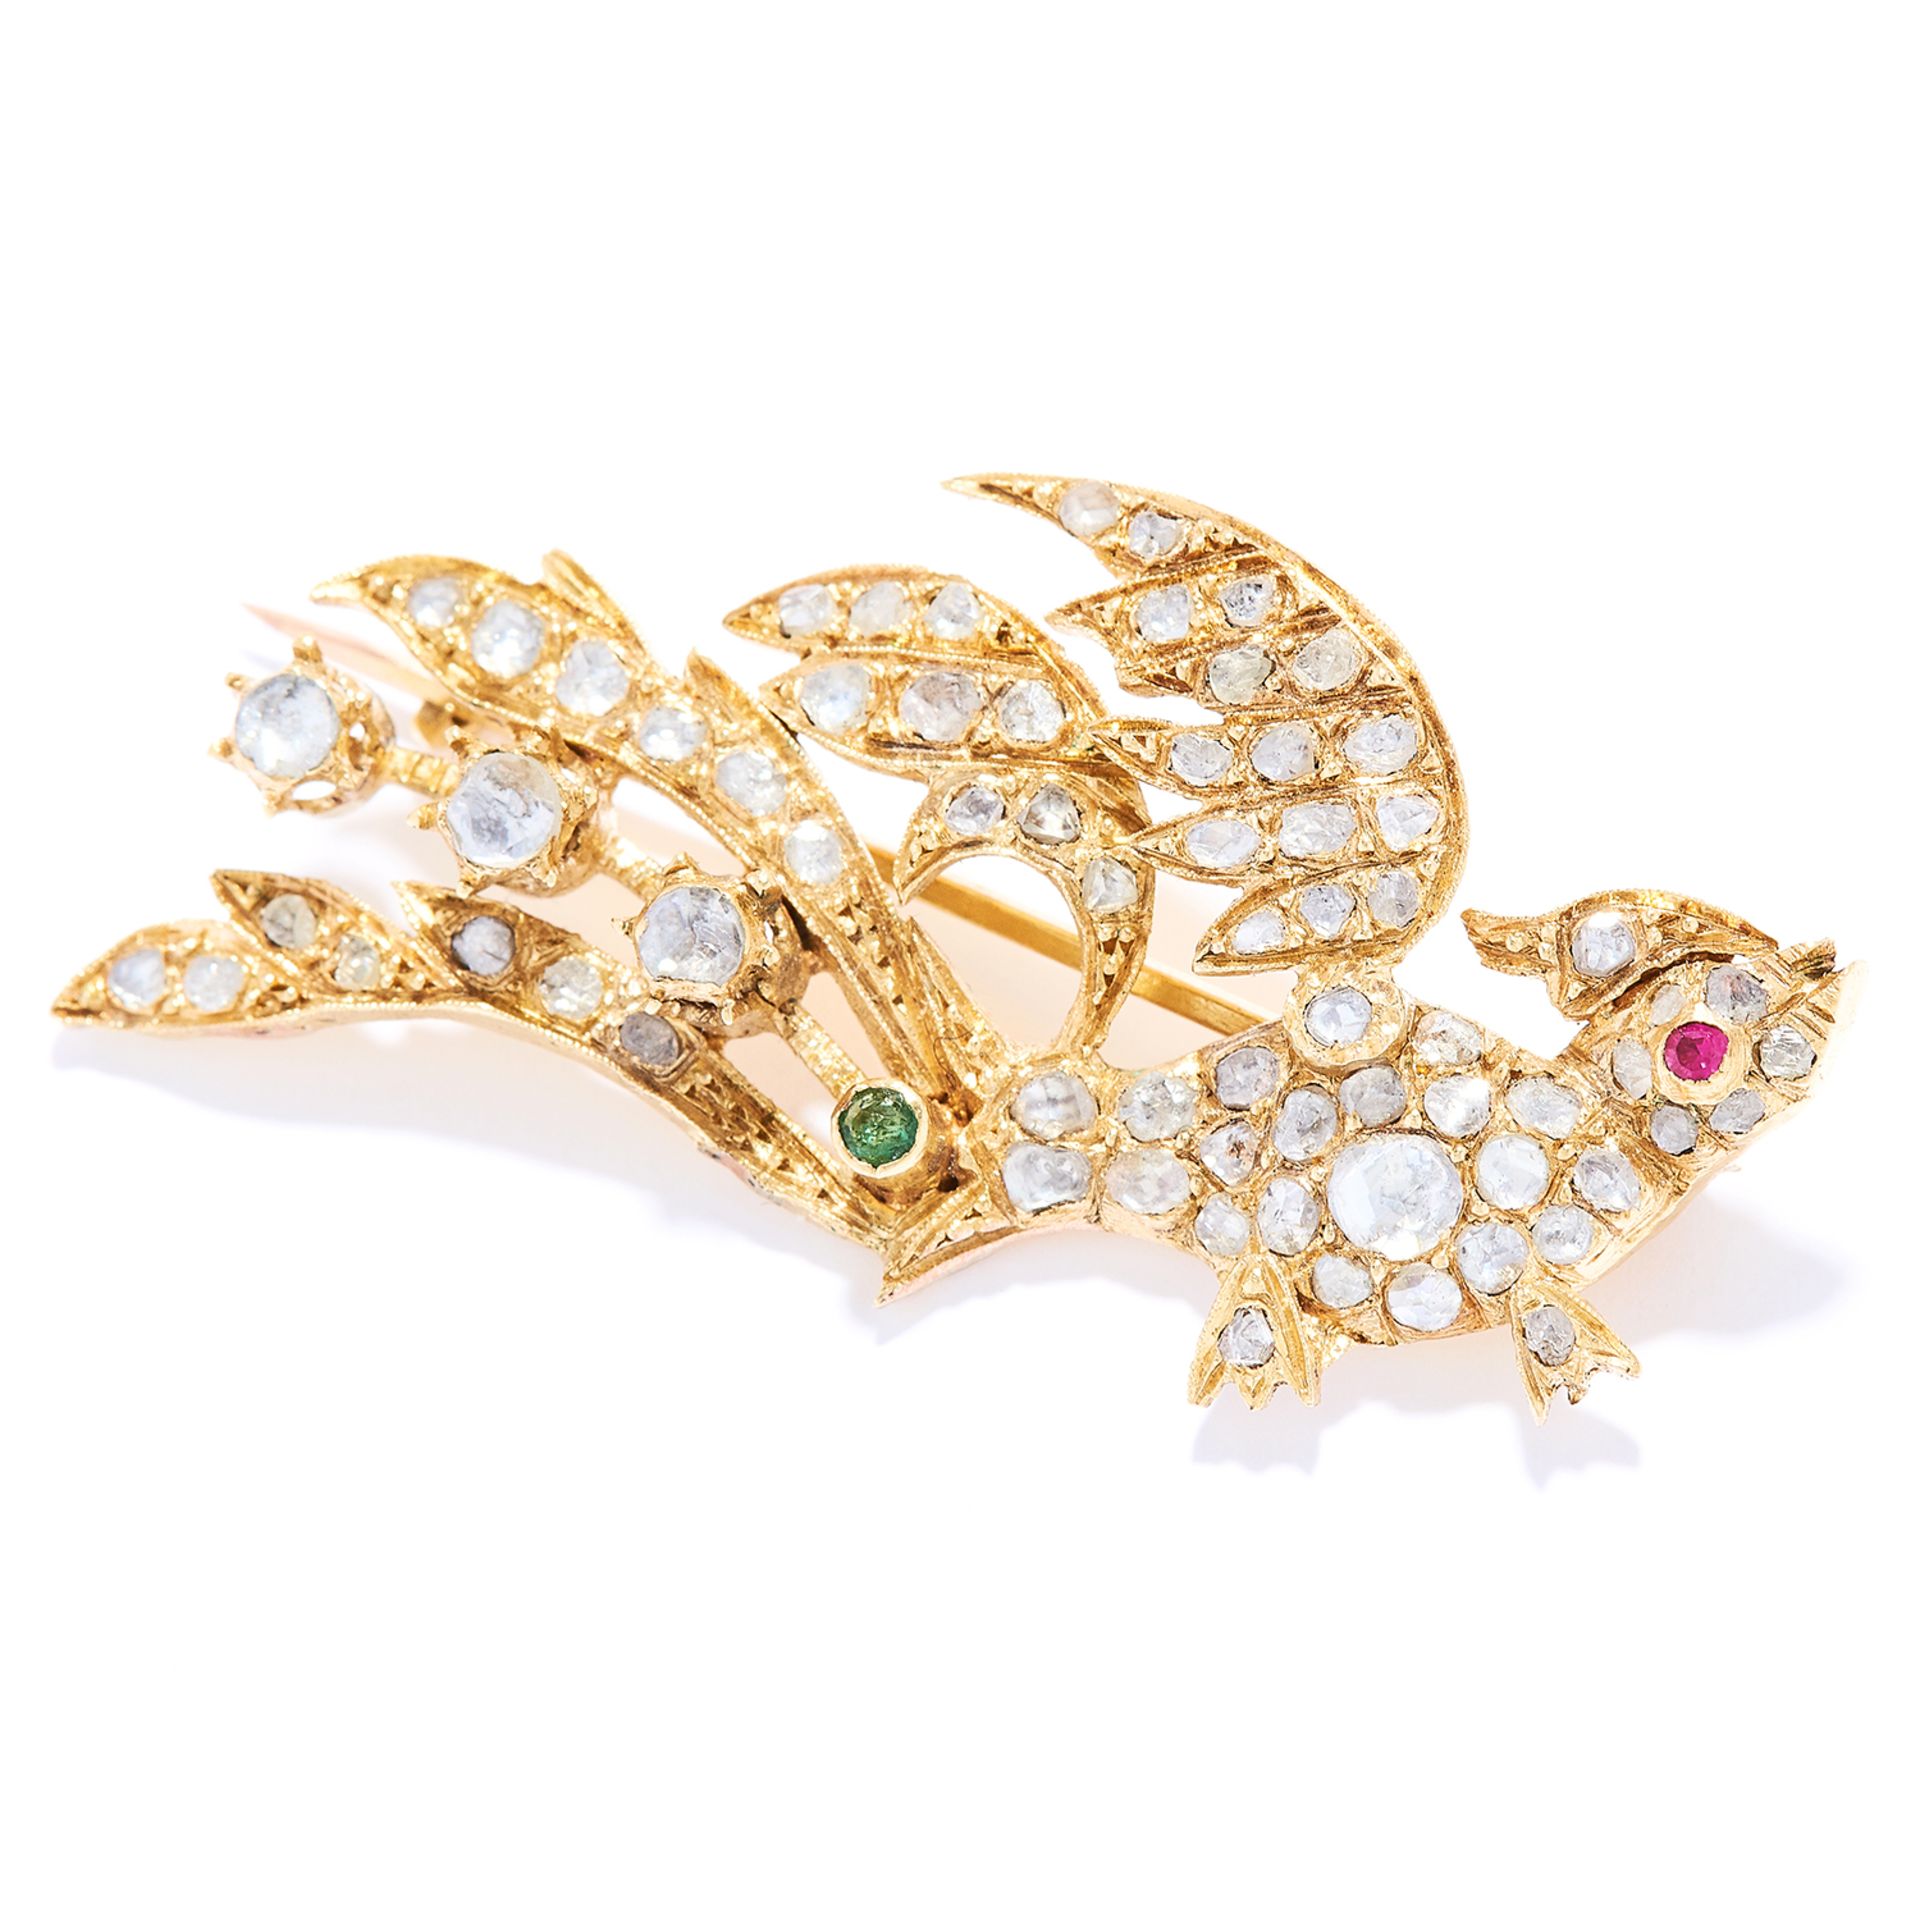 RUBY, EMERALD AND DIAMOND BIRD BROOCH in yellow gold, depicting a bird, set with a round cut ruby